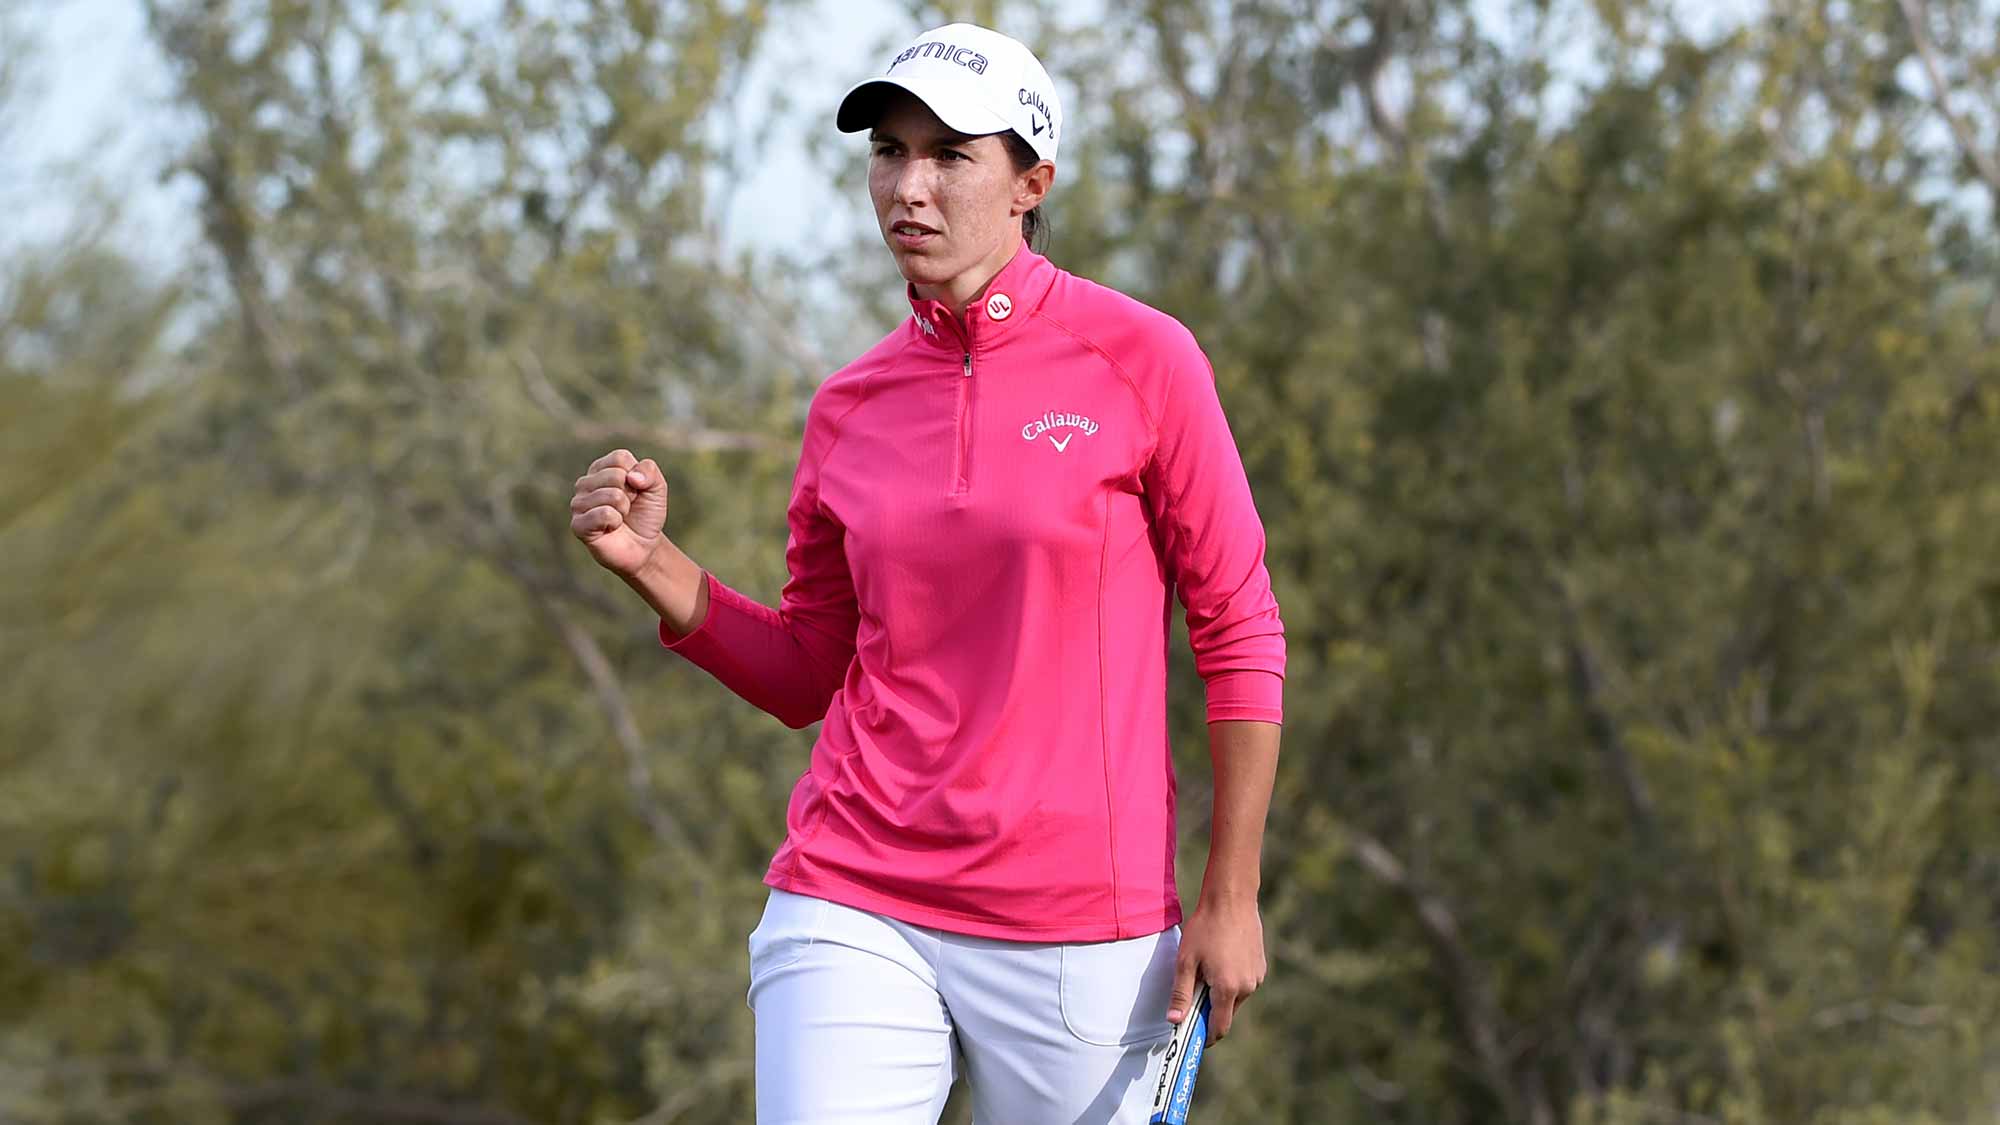 Carlota Ciganda of Spain reacts after hitting her birdie putt on the 18th hole during the third round of the Bank Of Hope Founders Cup at the Wildfire Golf Club on March 23, 2019 in Phoenix, Arizona